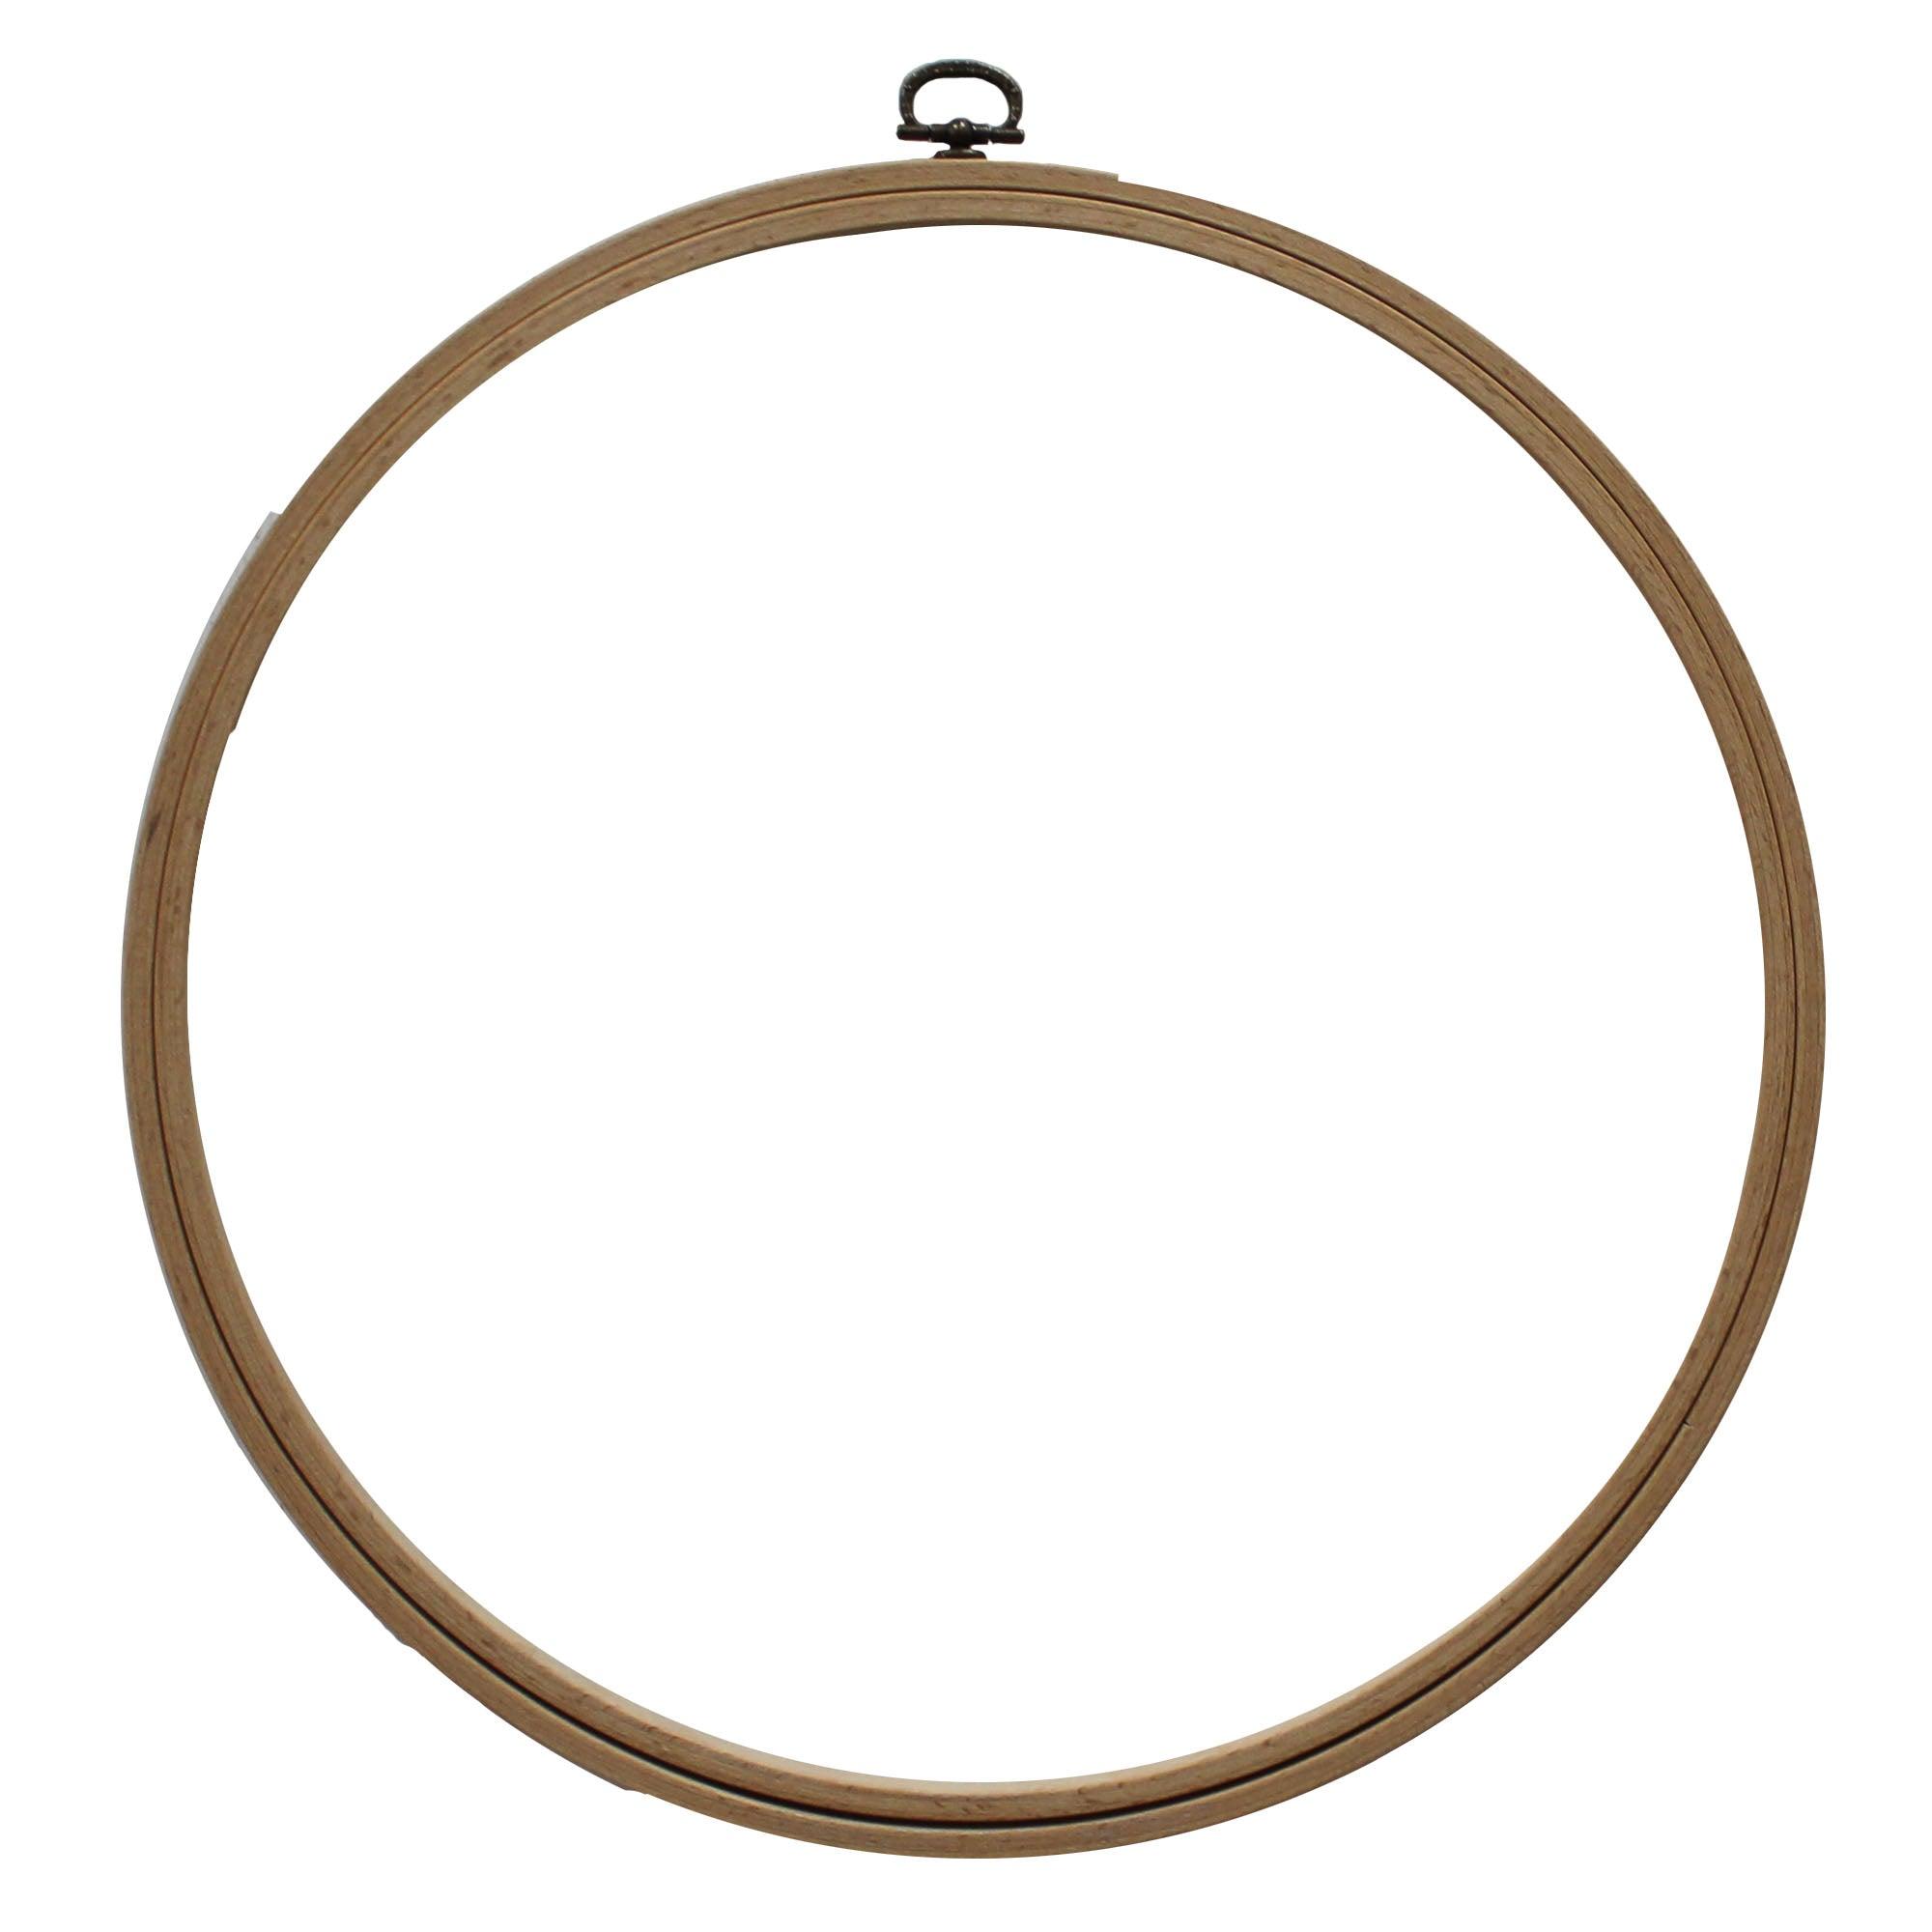 Beech Wood Embroidery Hoop, 2 Packs 6 Inch Cross Stitch Hoops, Round  Splinters Free for Art Craft Sewing and Embroidery Hoop Decorative Hanging